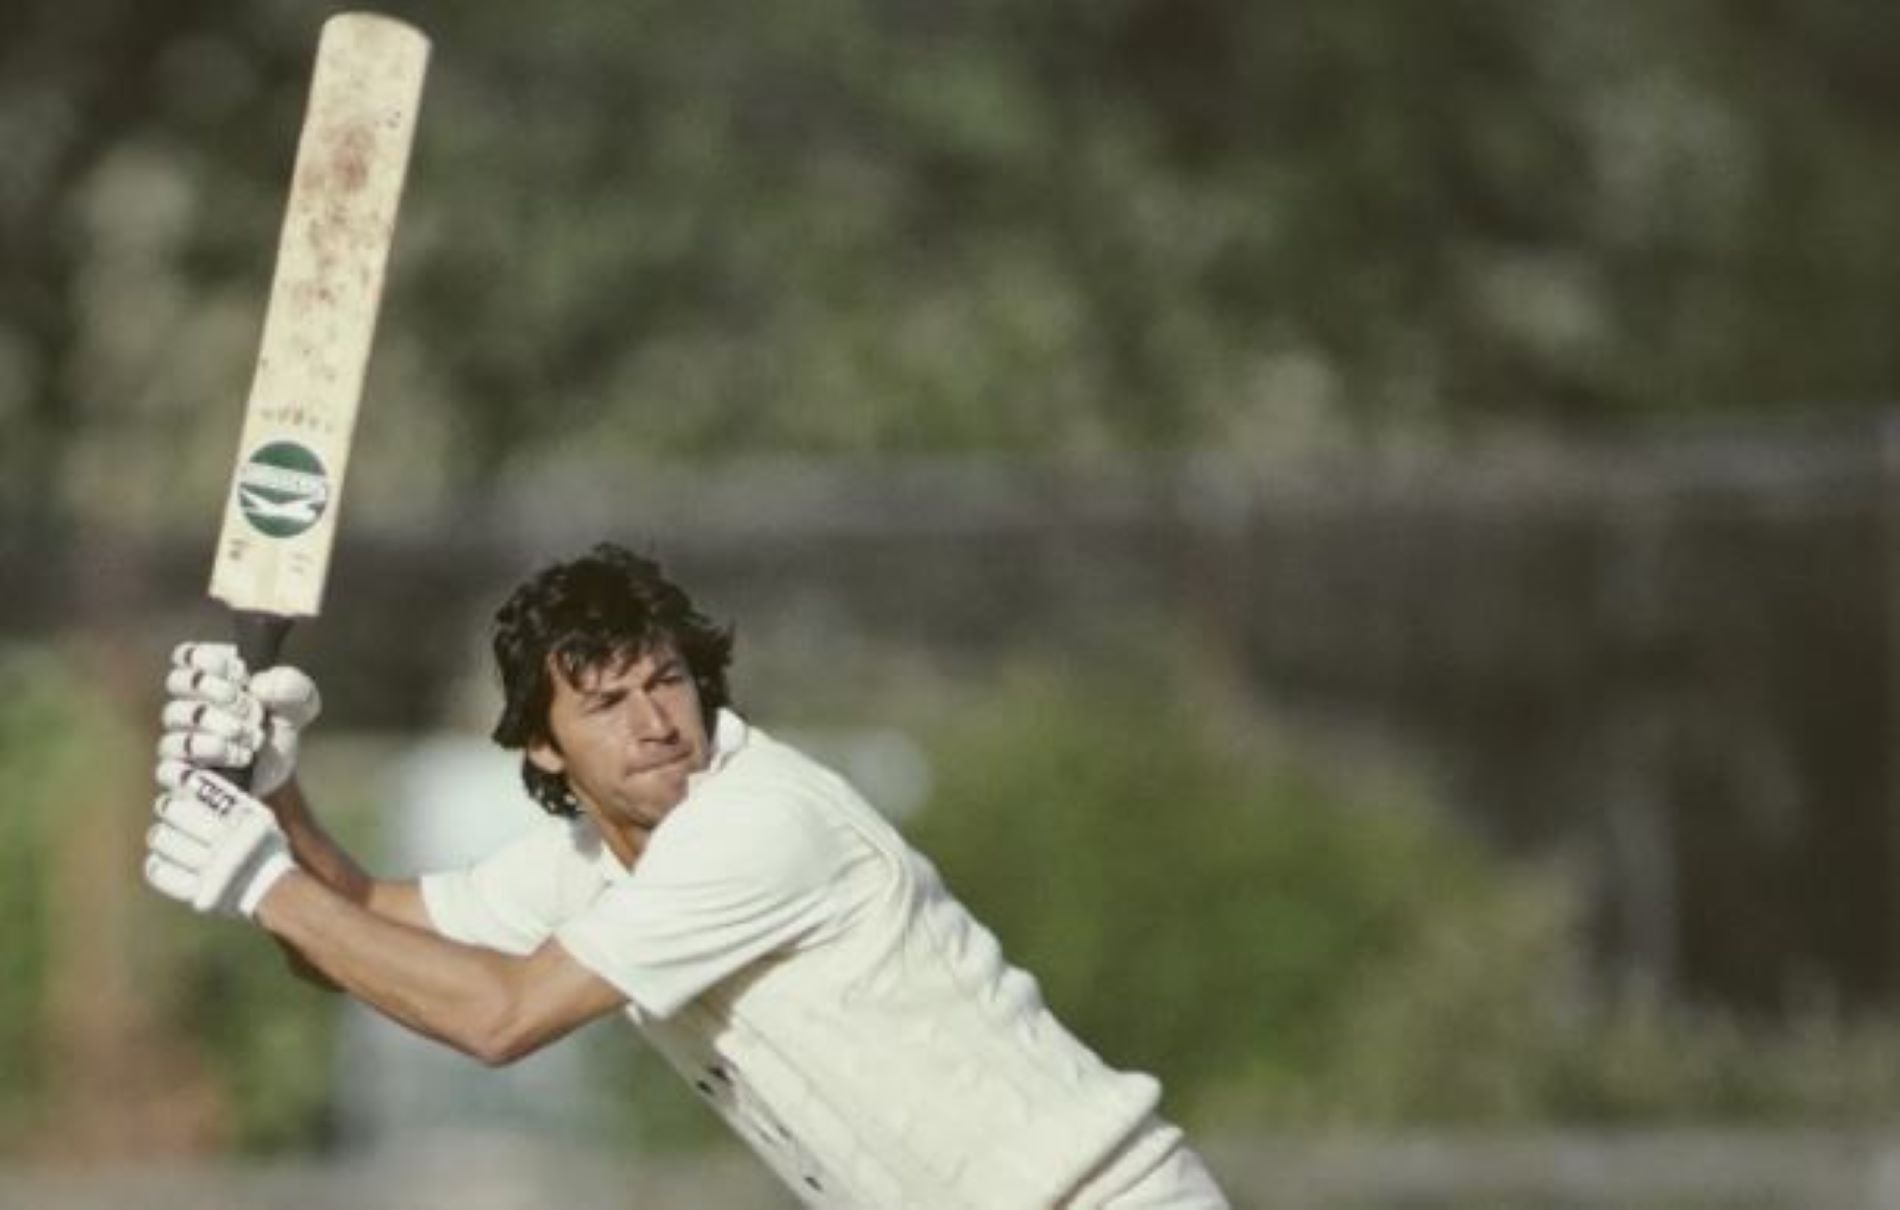 Imran Khan smashed his first and only World Cup century against Sri Lanka in 1983